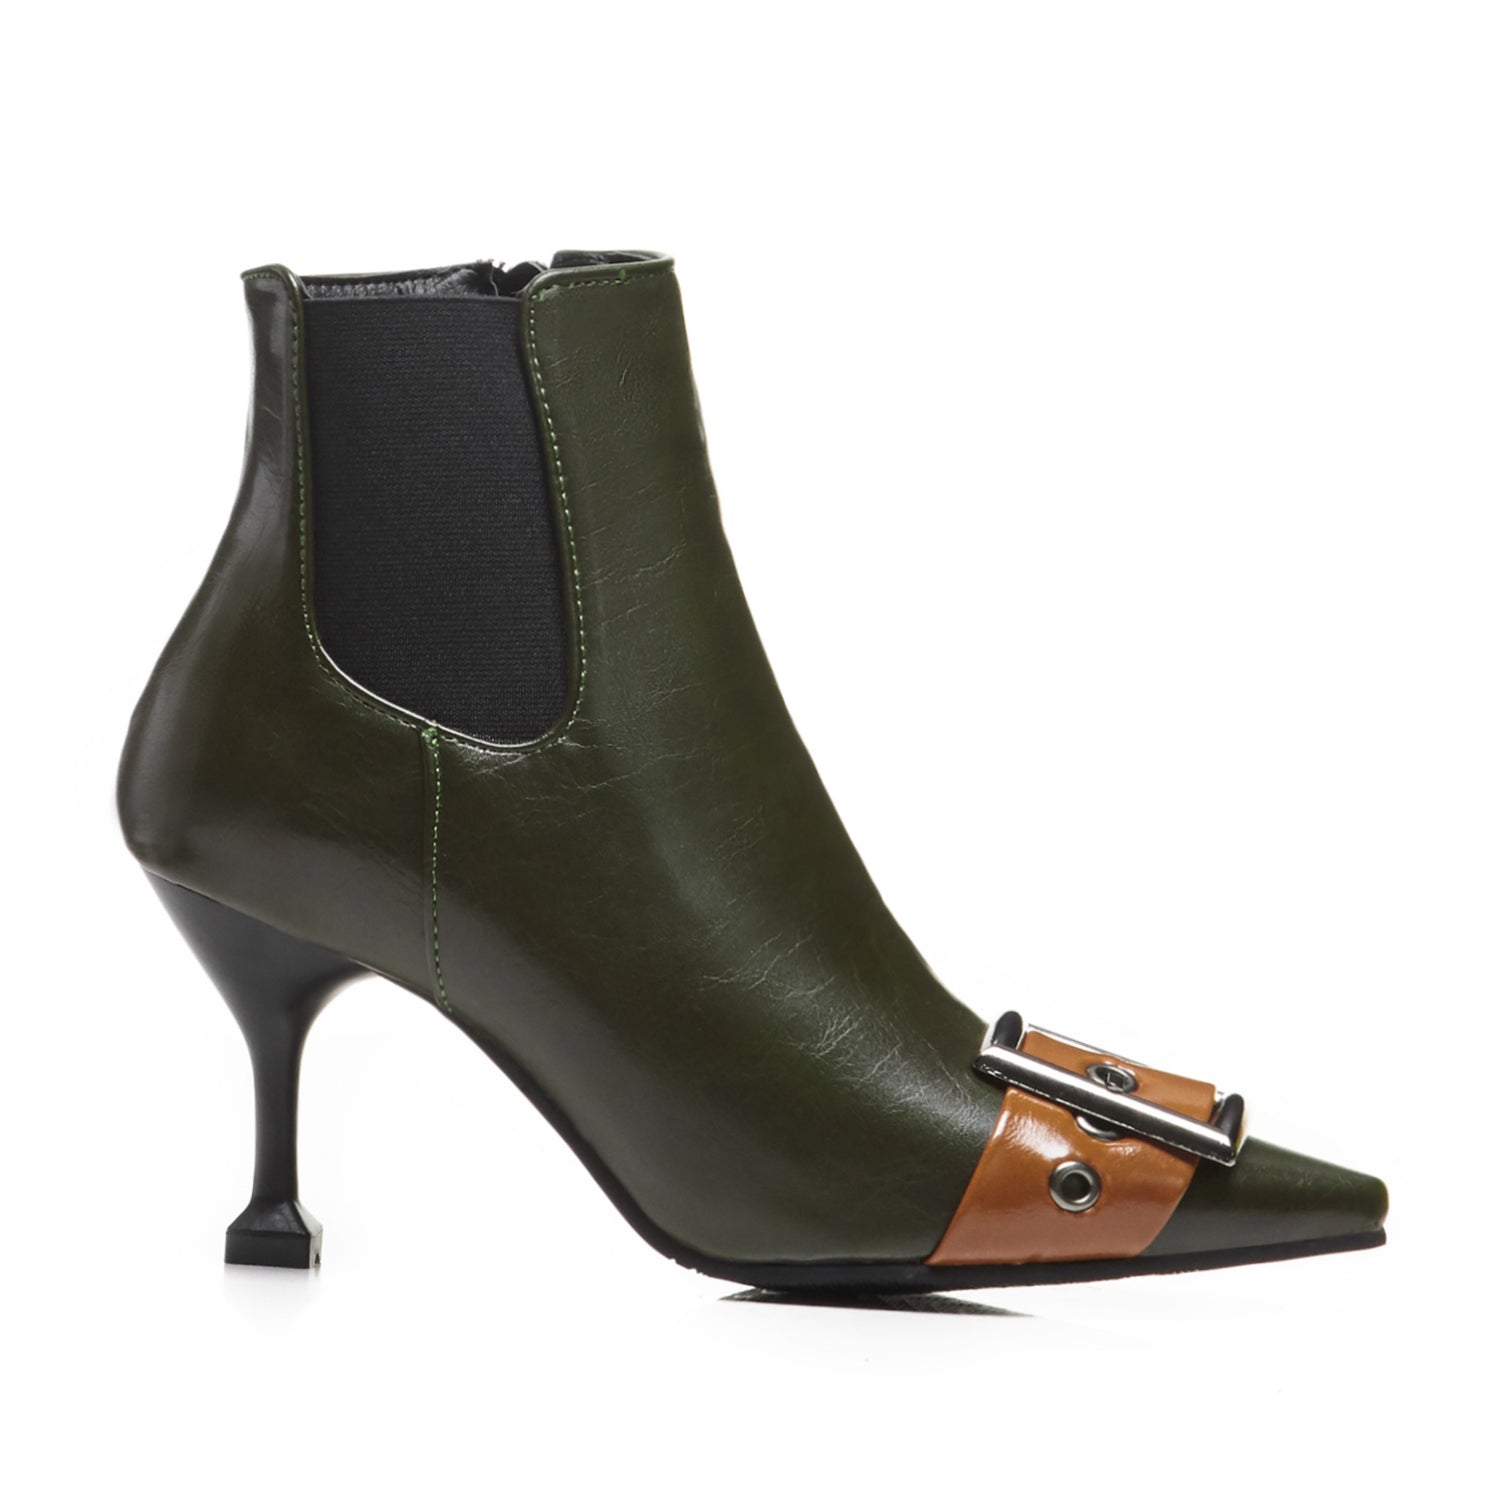 Bigsizeheels Sexy ankle boots with pointed belt buckles - Green freeshipping - bigsizeheel®-size5-size15 -All Plus Sizes Available!